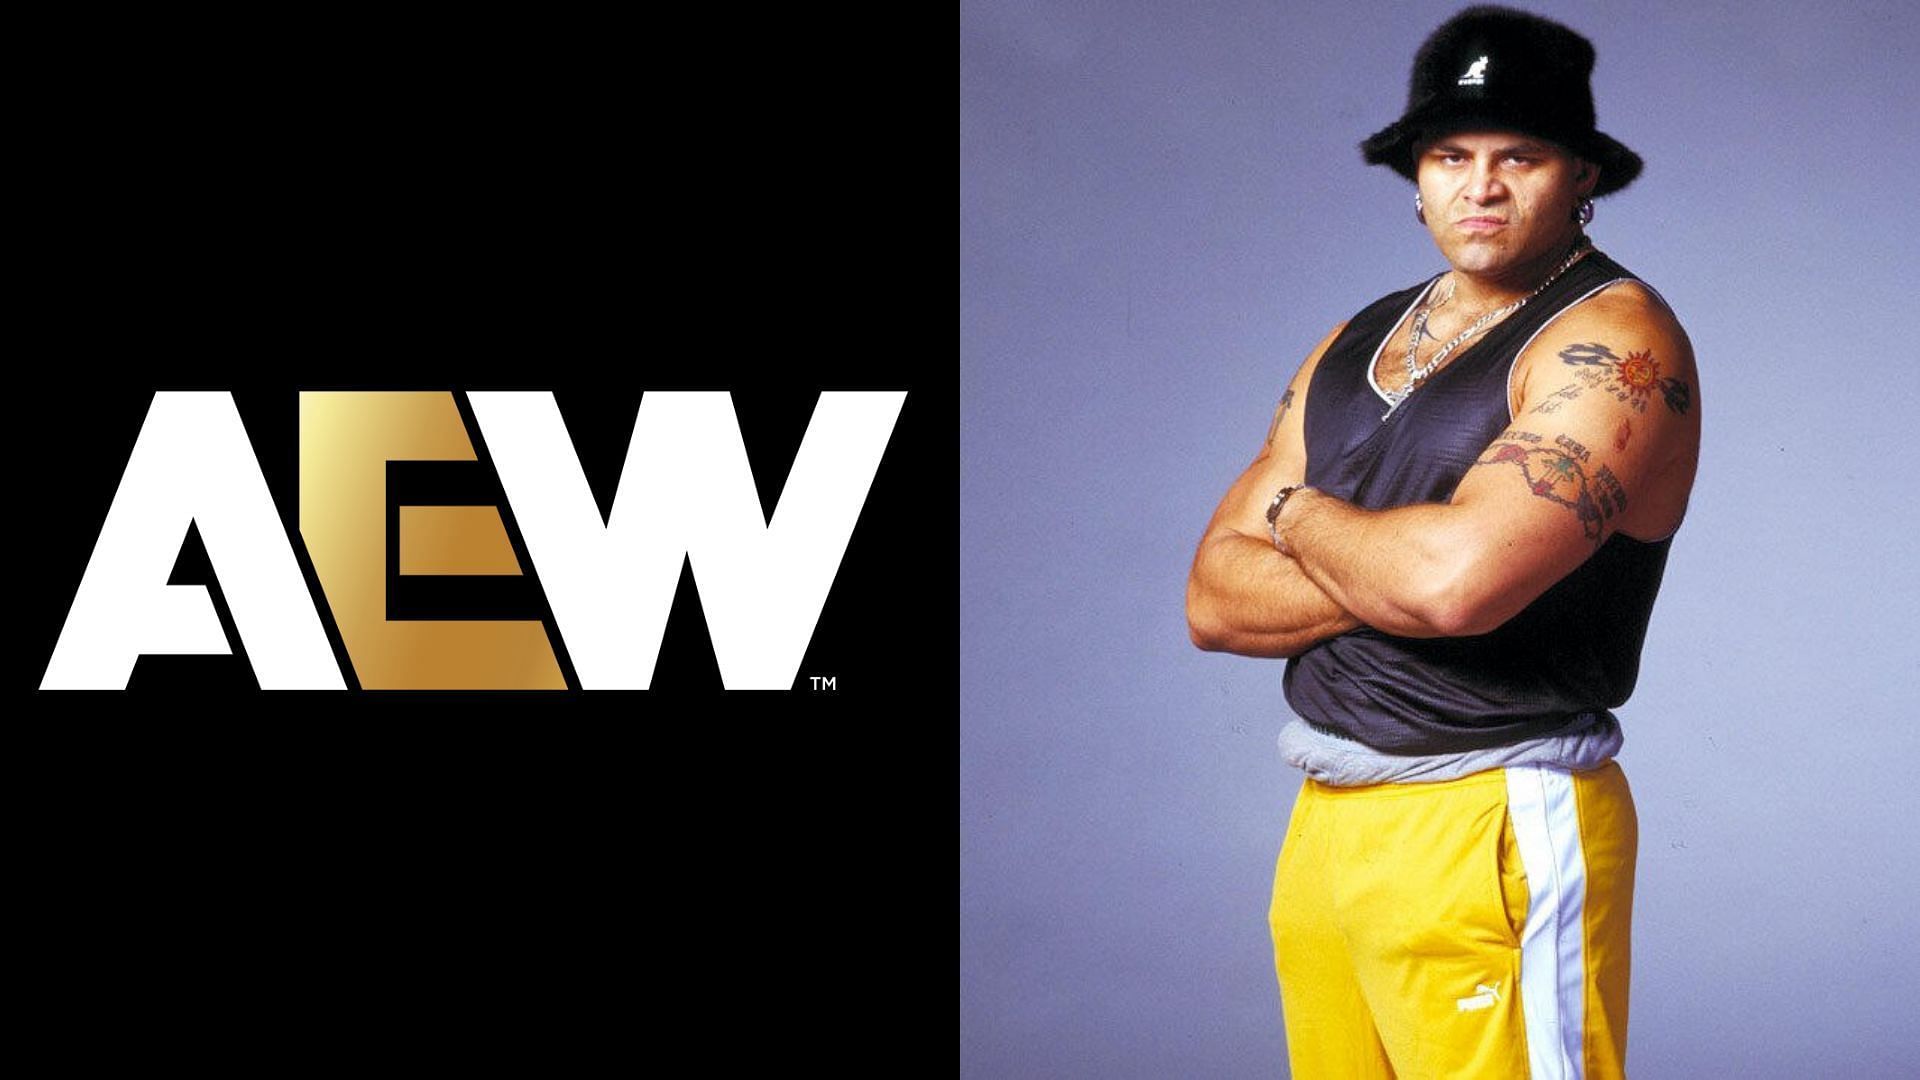 Konnan is a former WCW superstar [Photo courtesy of WWE